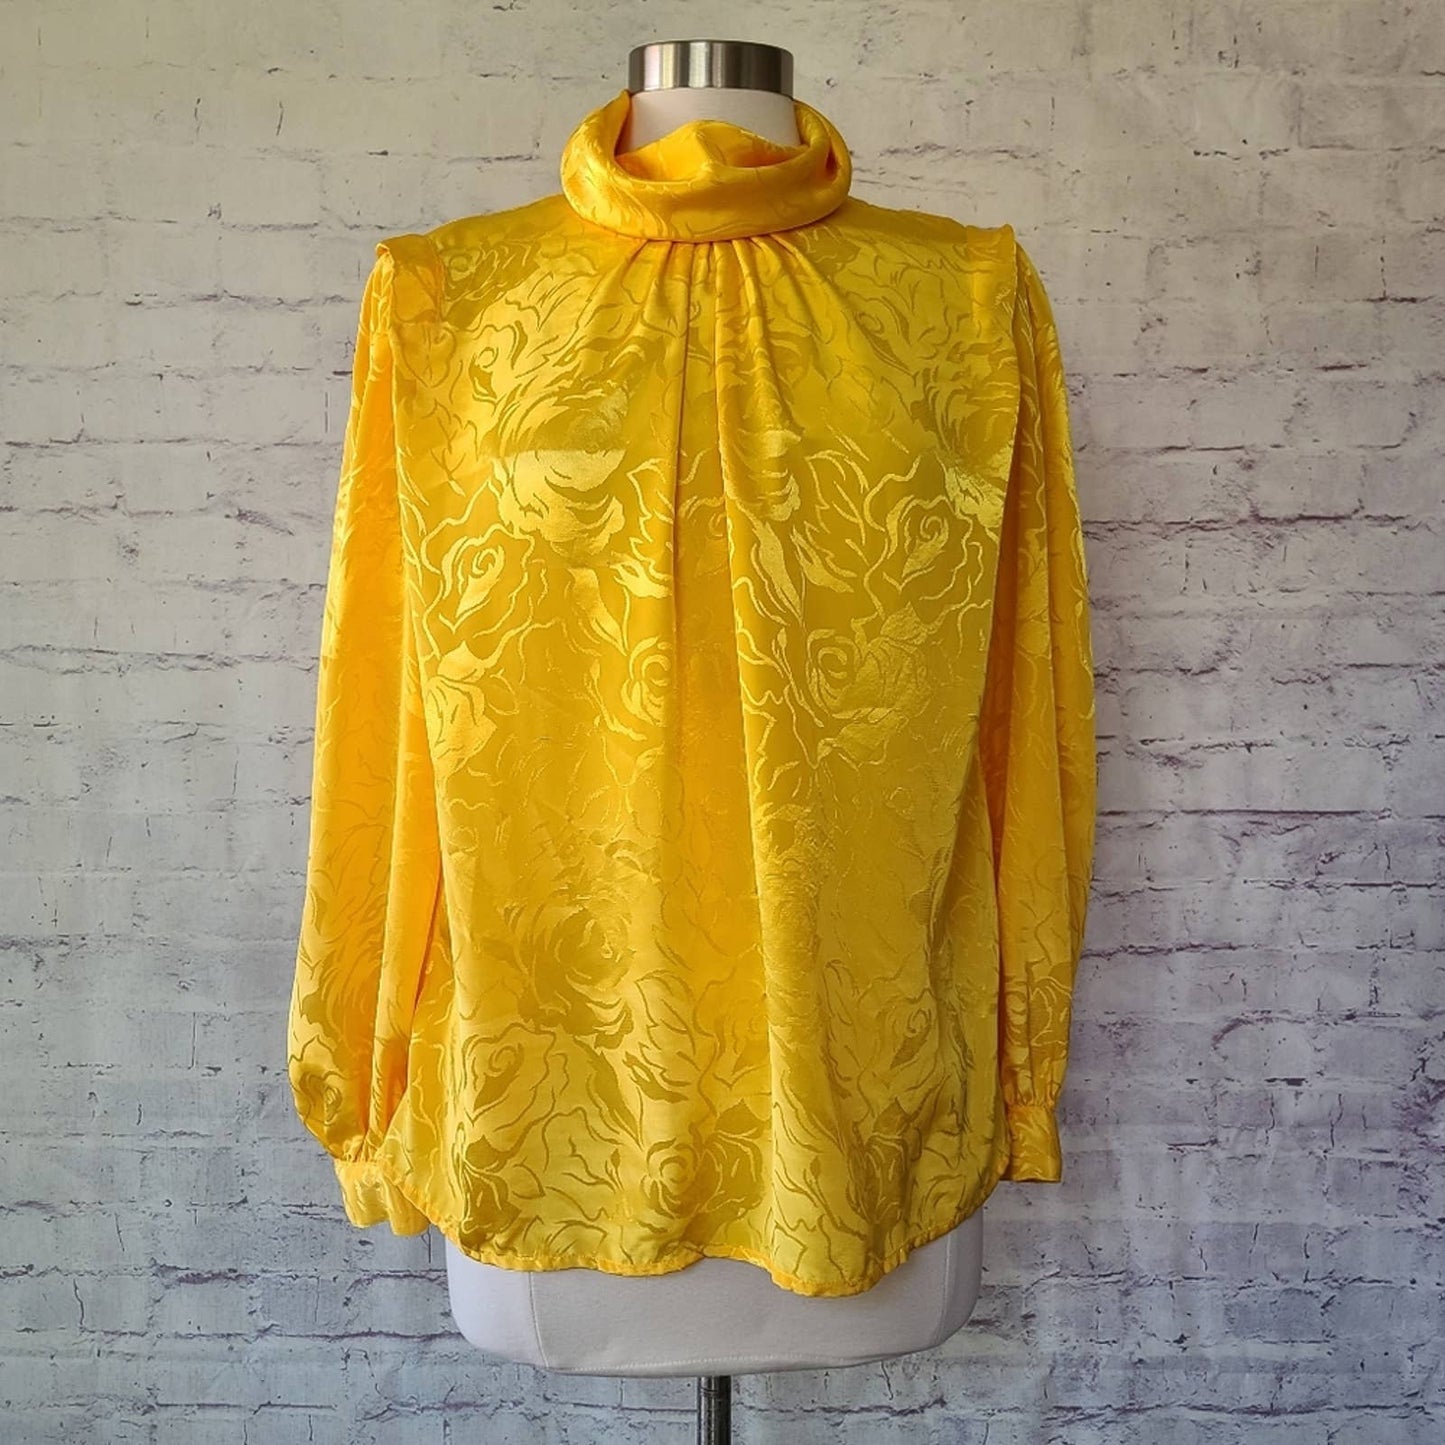 Vintage Career Concepts by Colony Yellow Floral Jacquard High Neck Blouse Large